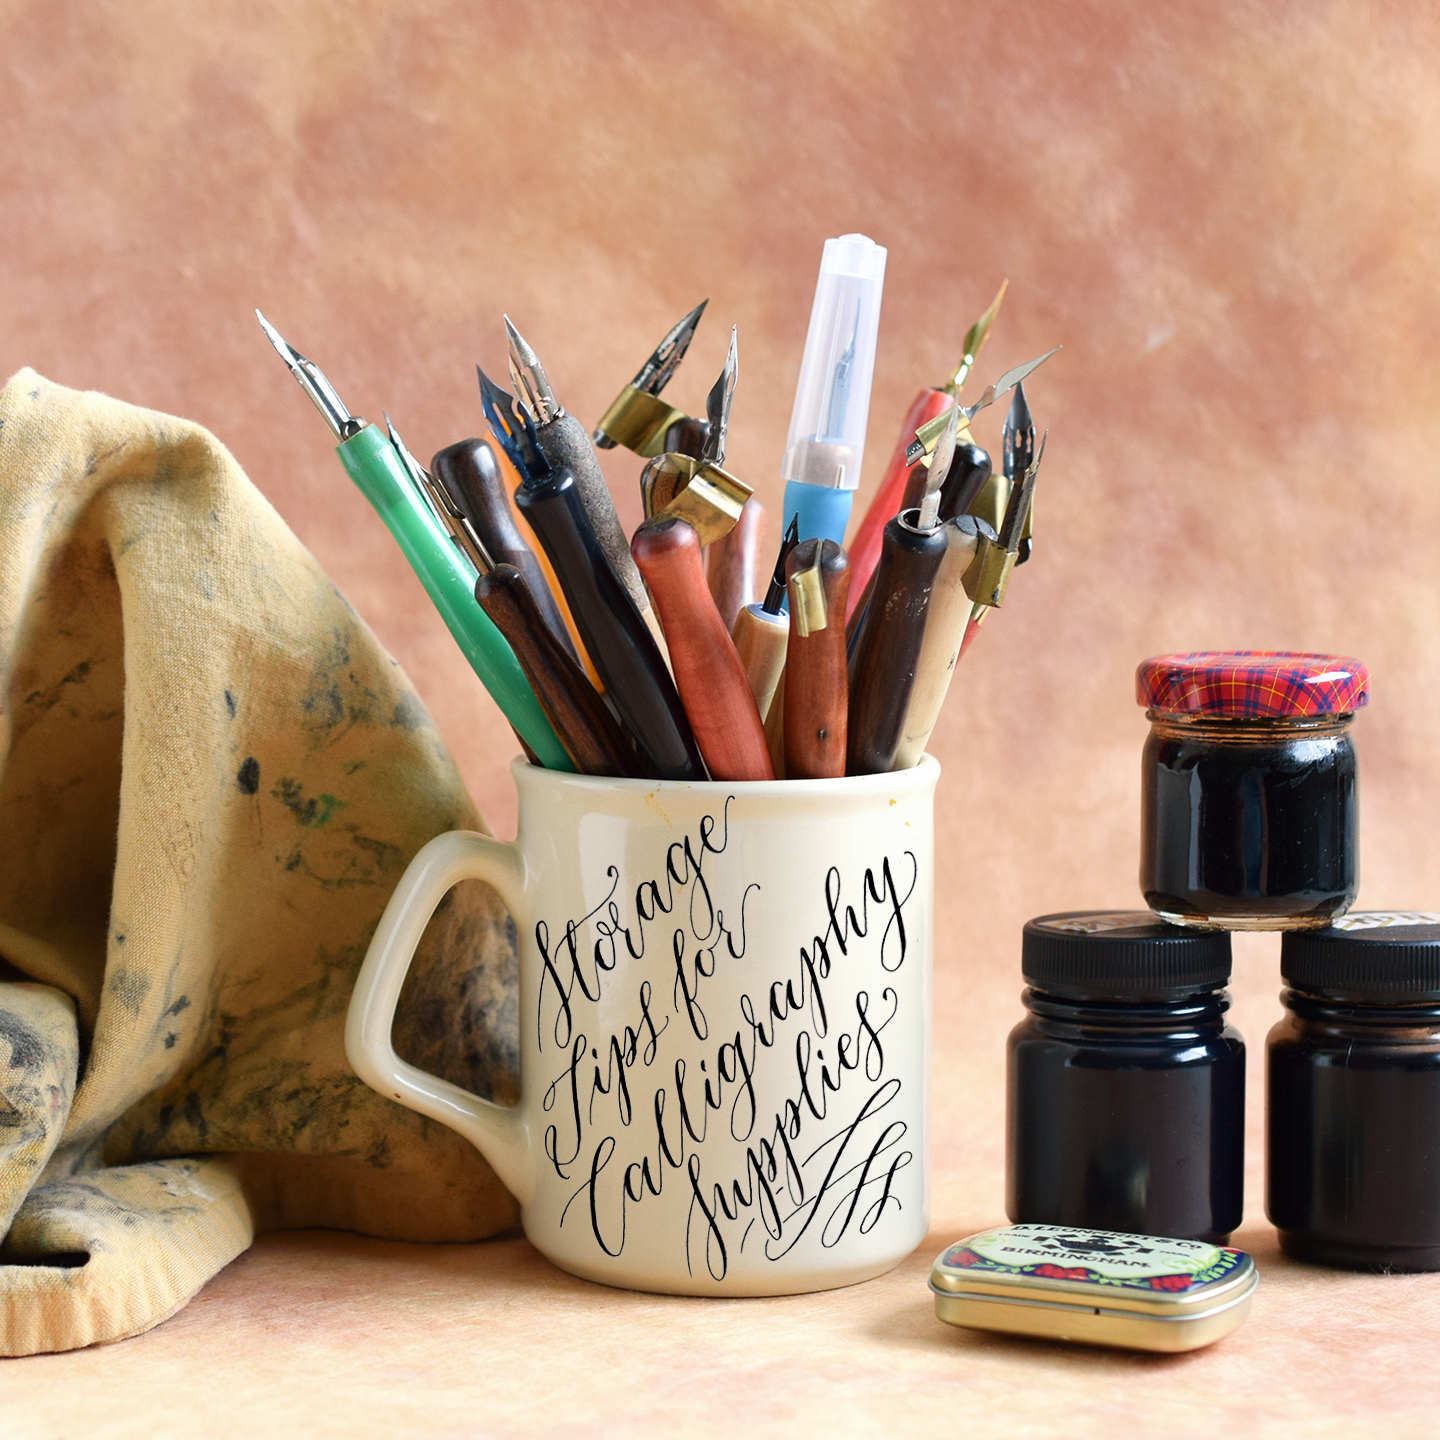 Storage Tips for Calligraphy Supplies